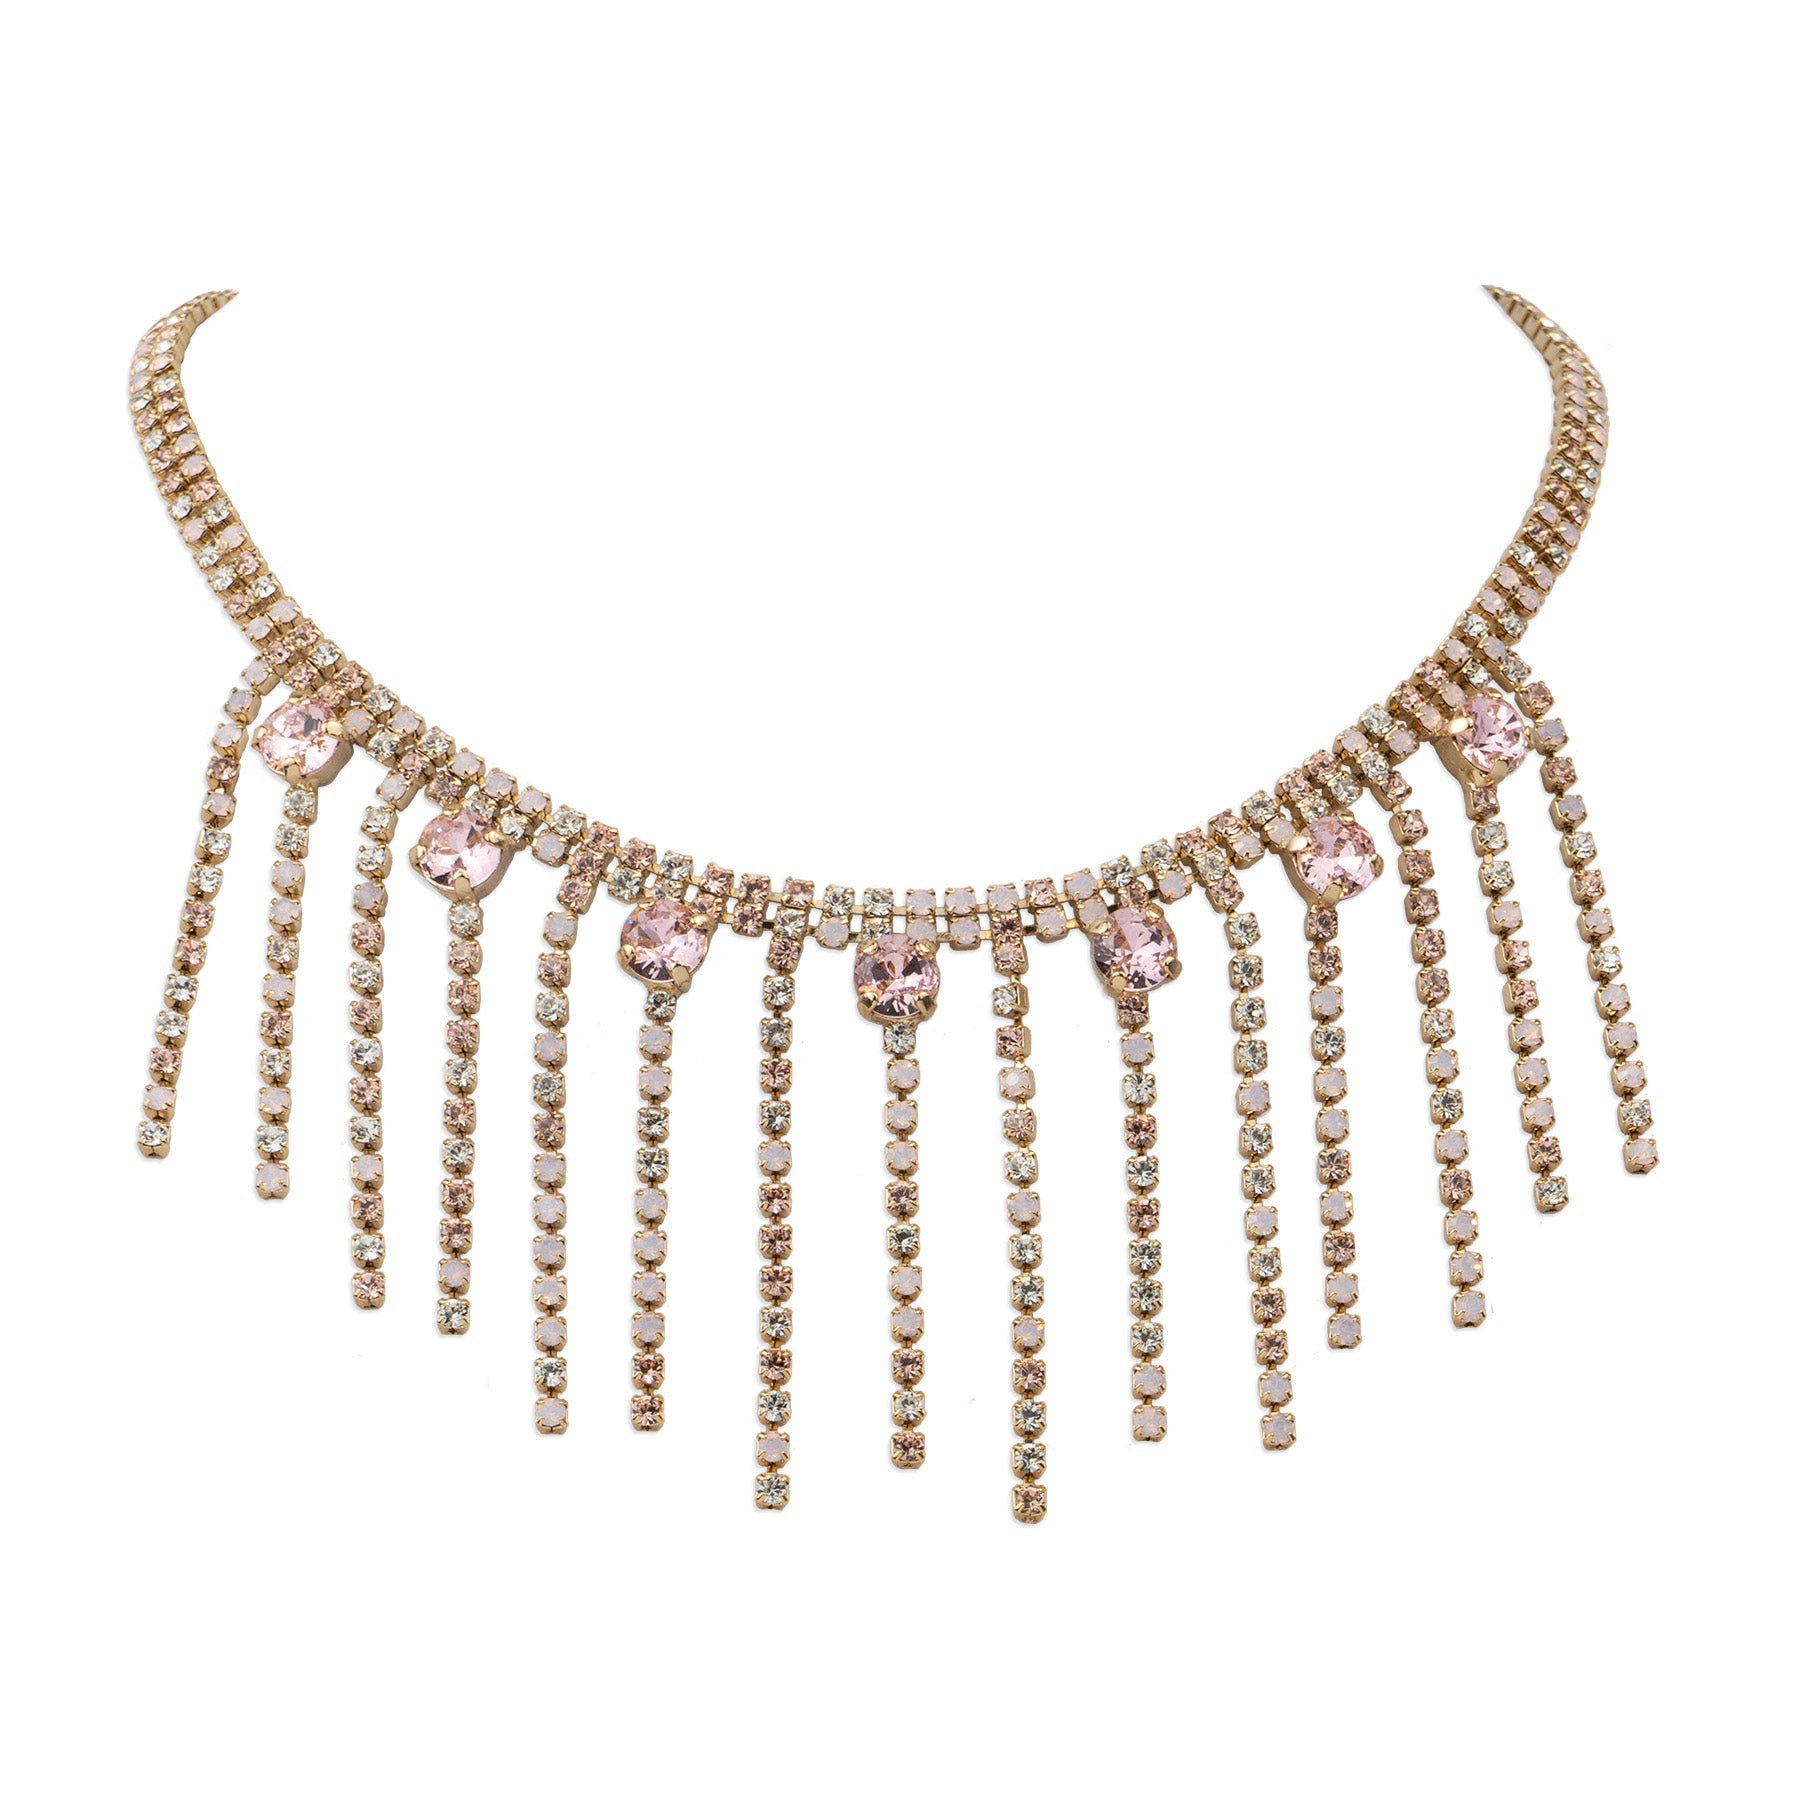 Choker necklace with multicolored crystal fringe